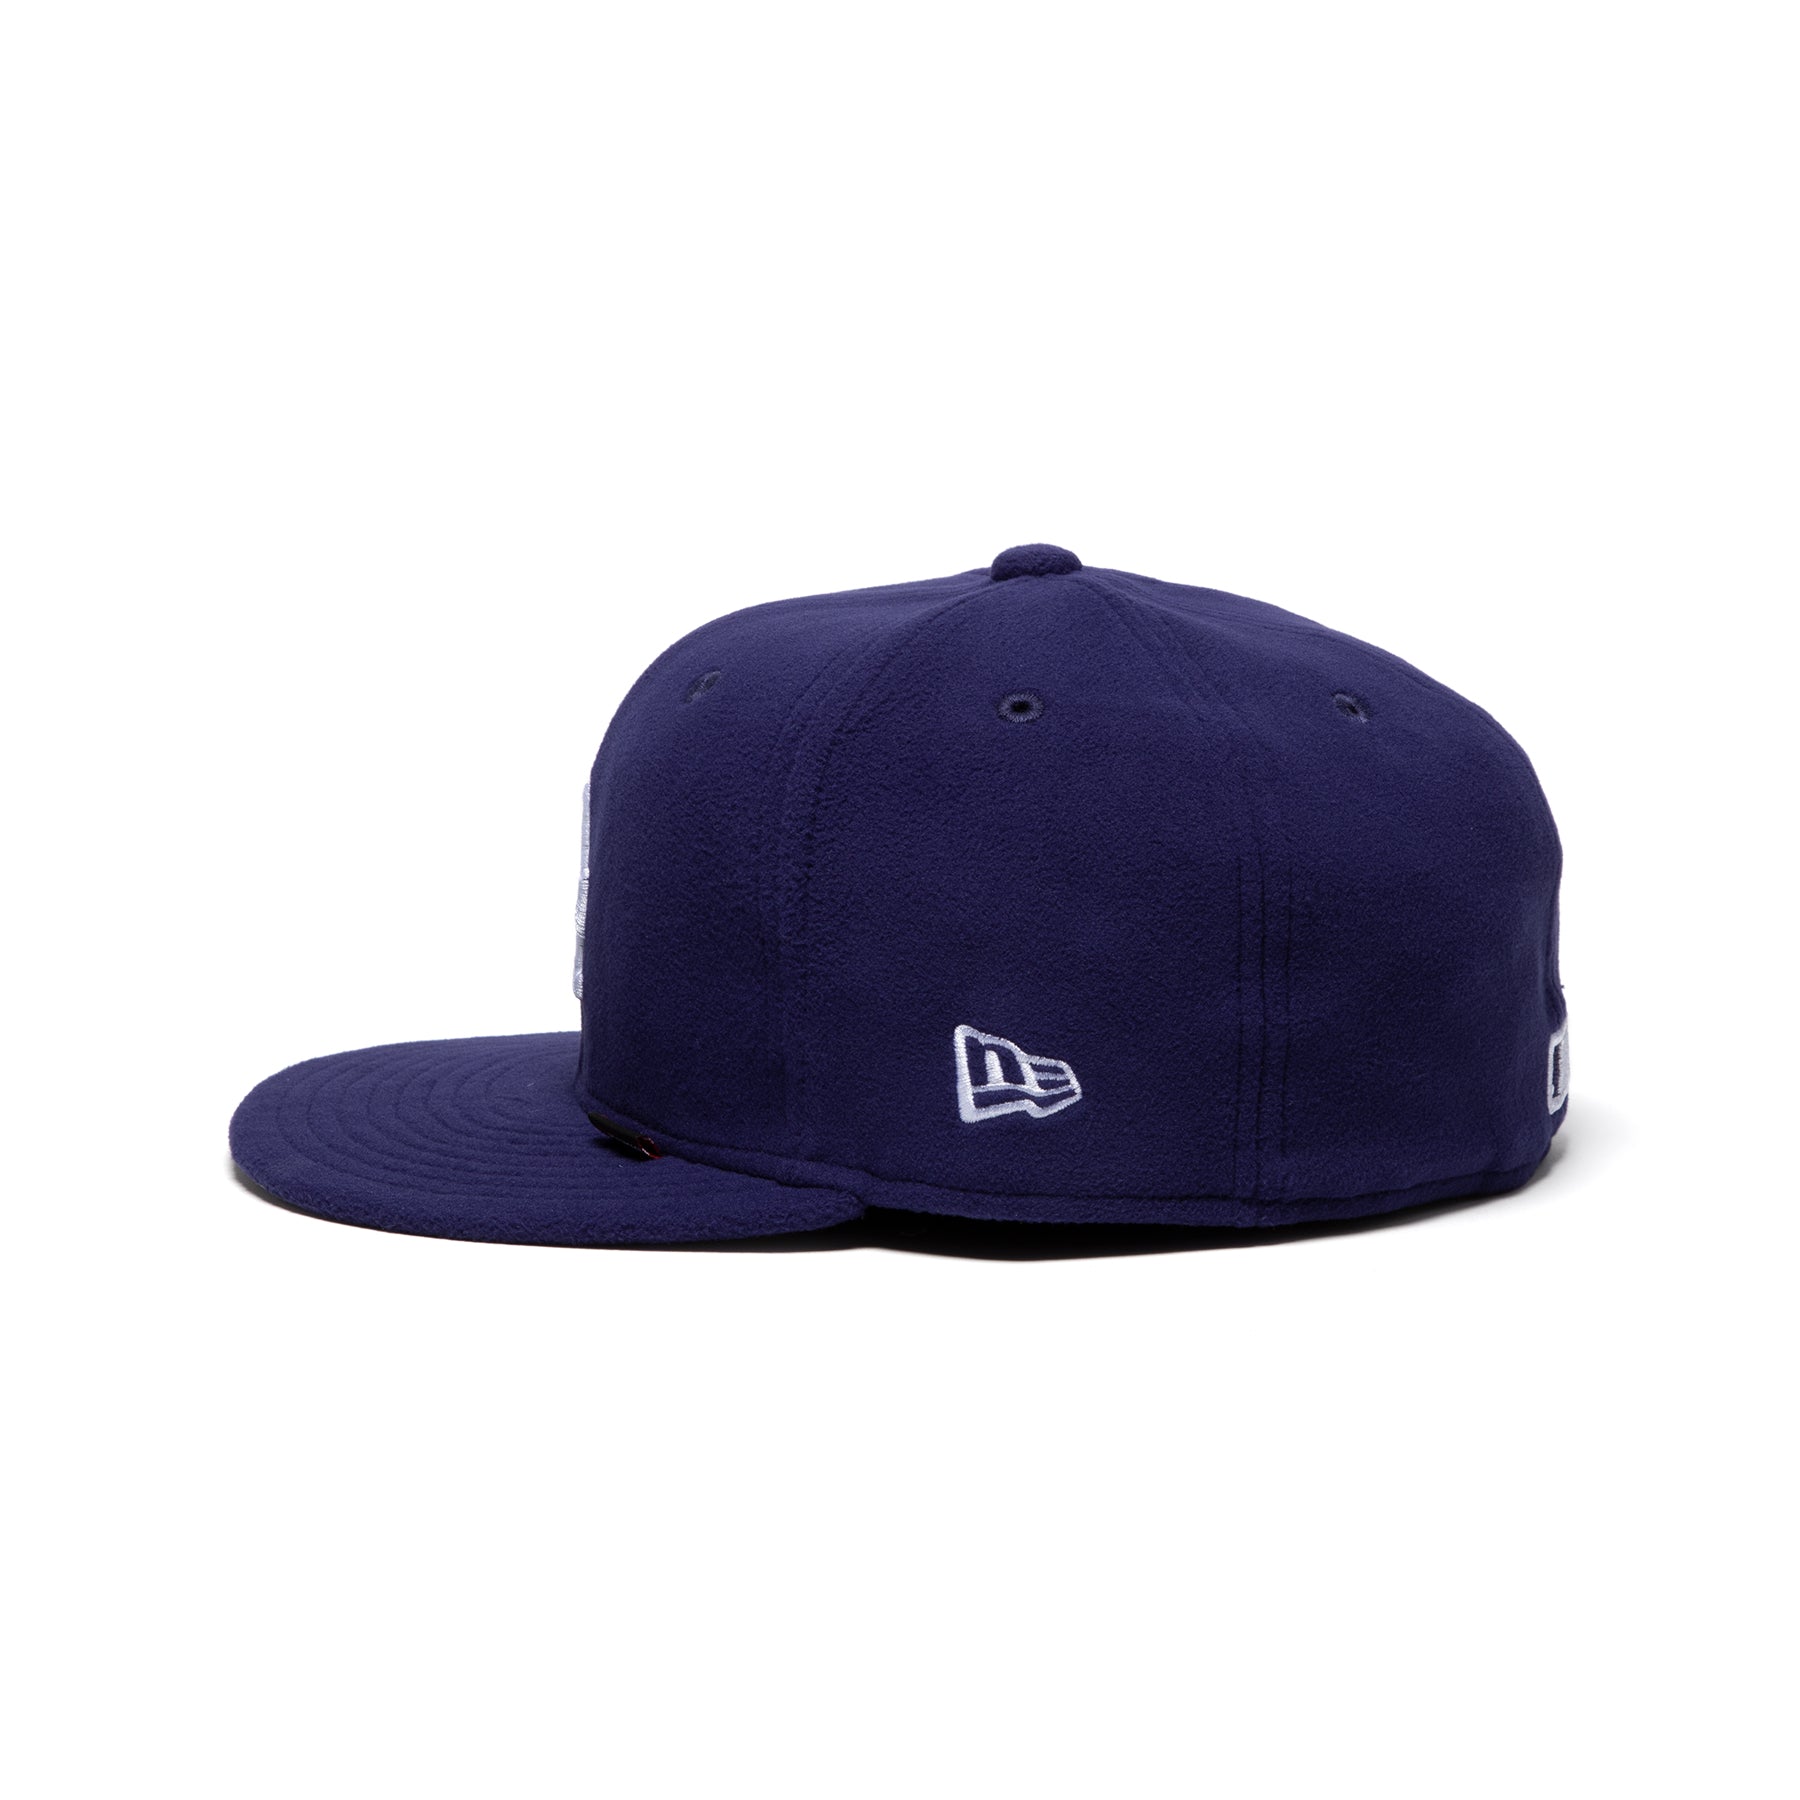 LOS ANGELES DODGERS VIVA LOS DODGERS NEW ERA FITTED CAP – SHIPPING DEPT